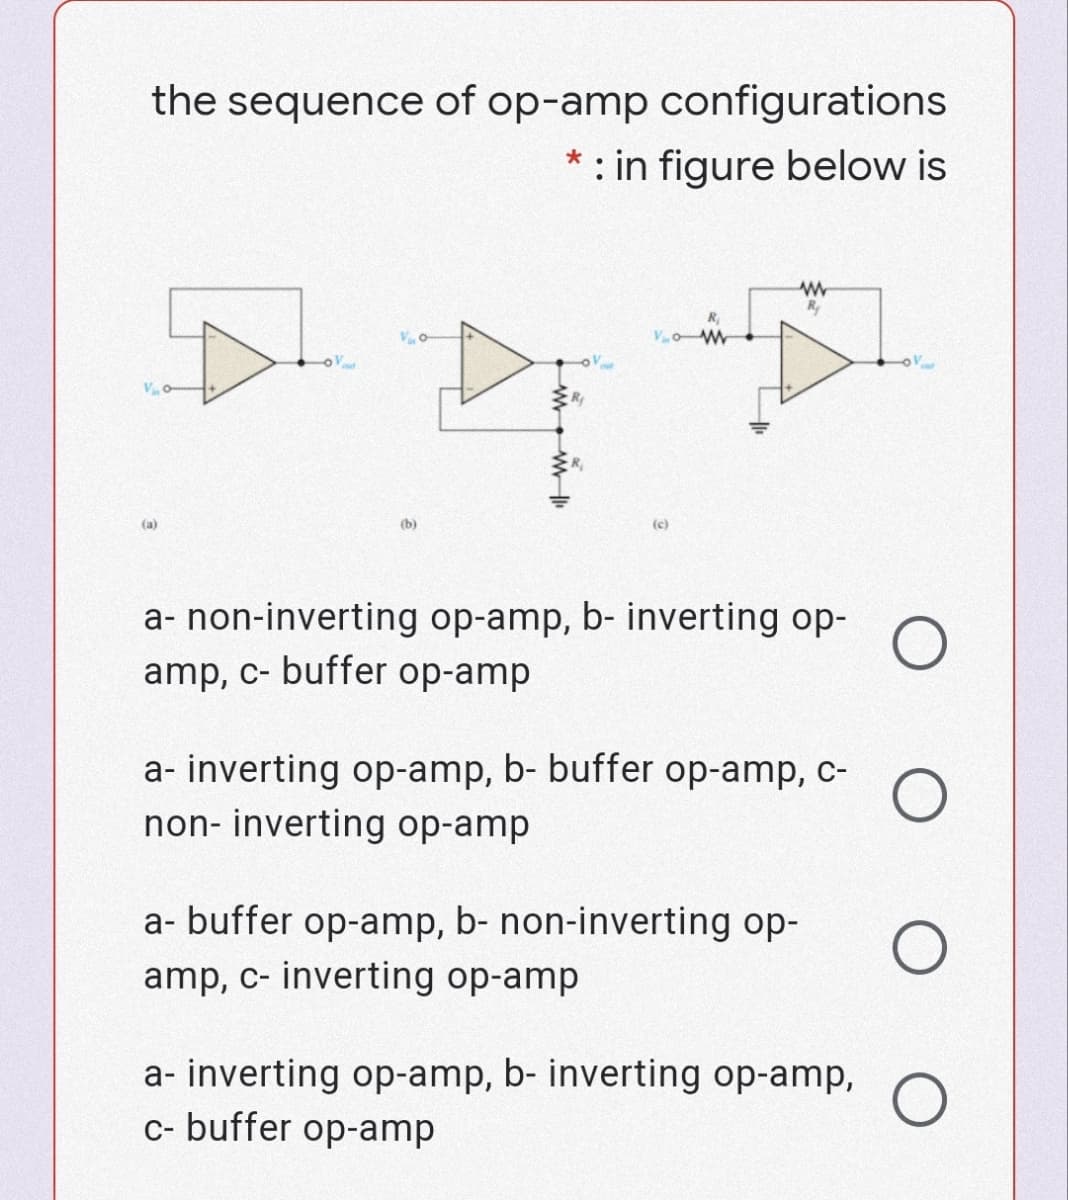 the sequence of op-amp configurations
* : in figure below is
R
R
(a)
(b)
(c)
a- non-inverting op-amp, b- inverting op-
amp, c- buffer op-amp
a- inverting op-amp, b- buffer op-amp, c-
non- inverting op-amp
a- buffer op-amp, b- non-inverting op-
amp, c- inverting op-amp
a- inverting op-amp, b- inverting op-amp, O
c- buffer op-amp
